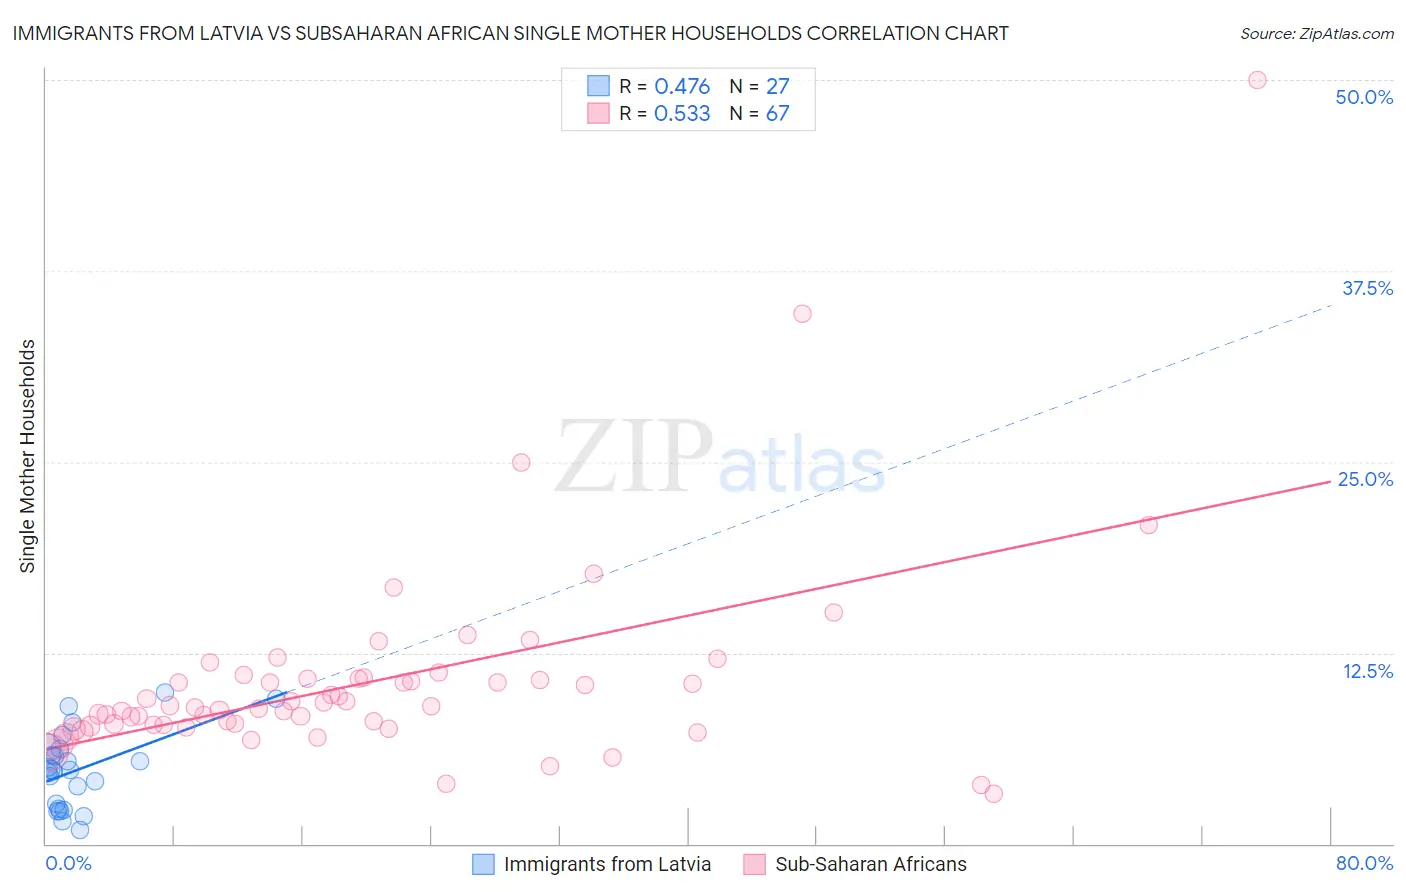 Immigrants from Latvia vs Subsaharan African Single Mother Households